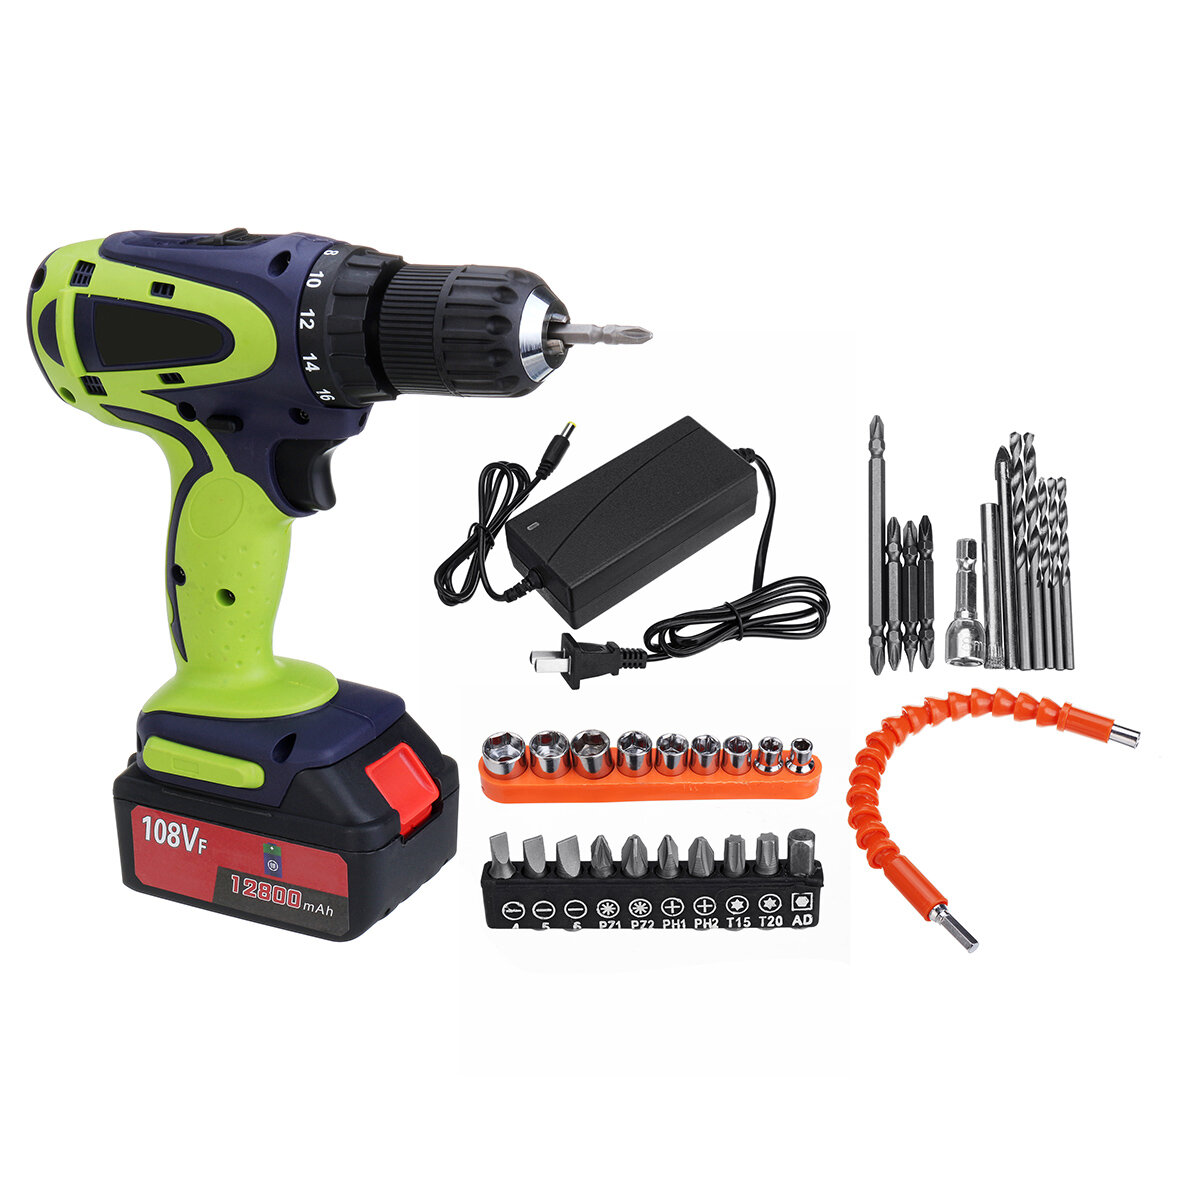 Image of 108VF 12800mAh Dual Speed Cordless Drill Multifunctional High Power Household Electric Drills W/ Accessories